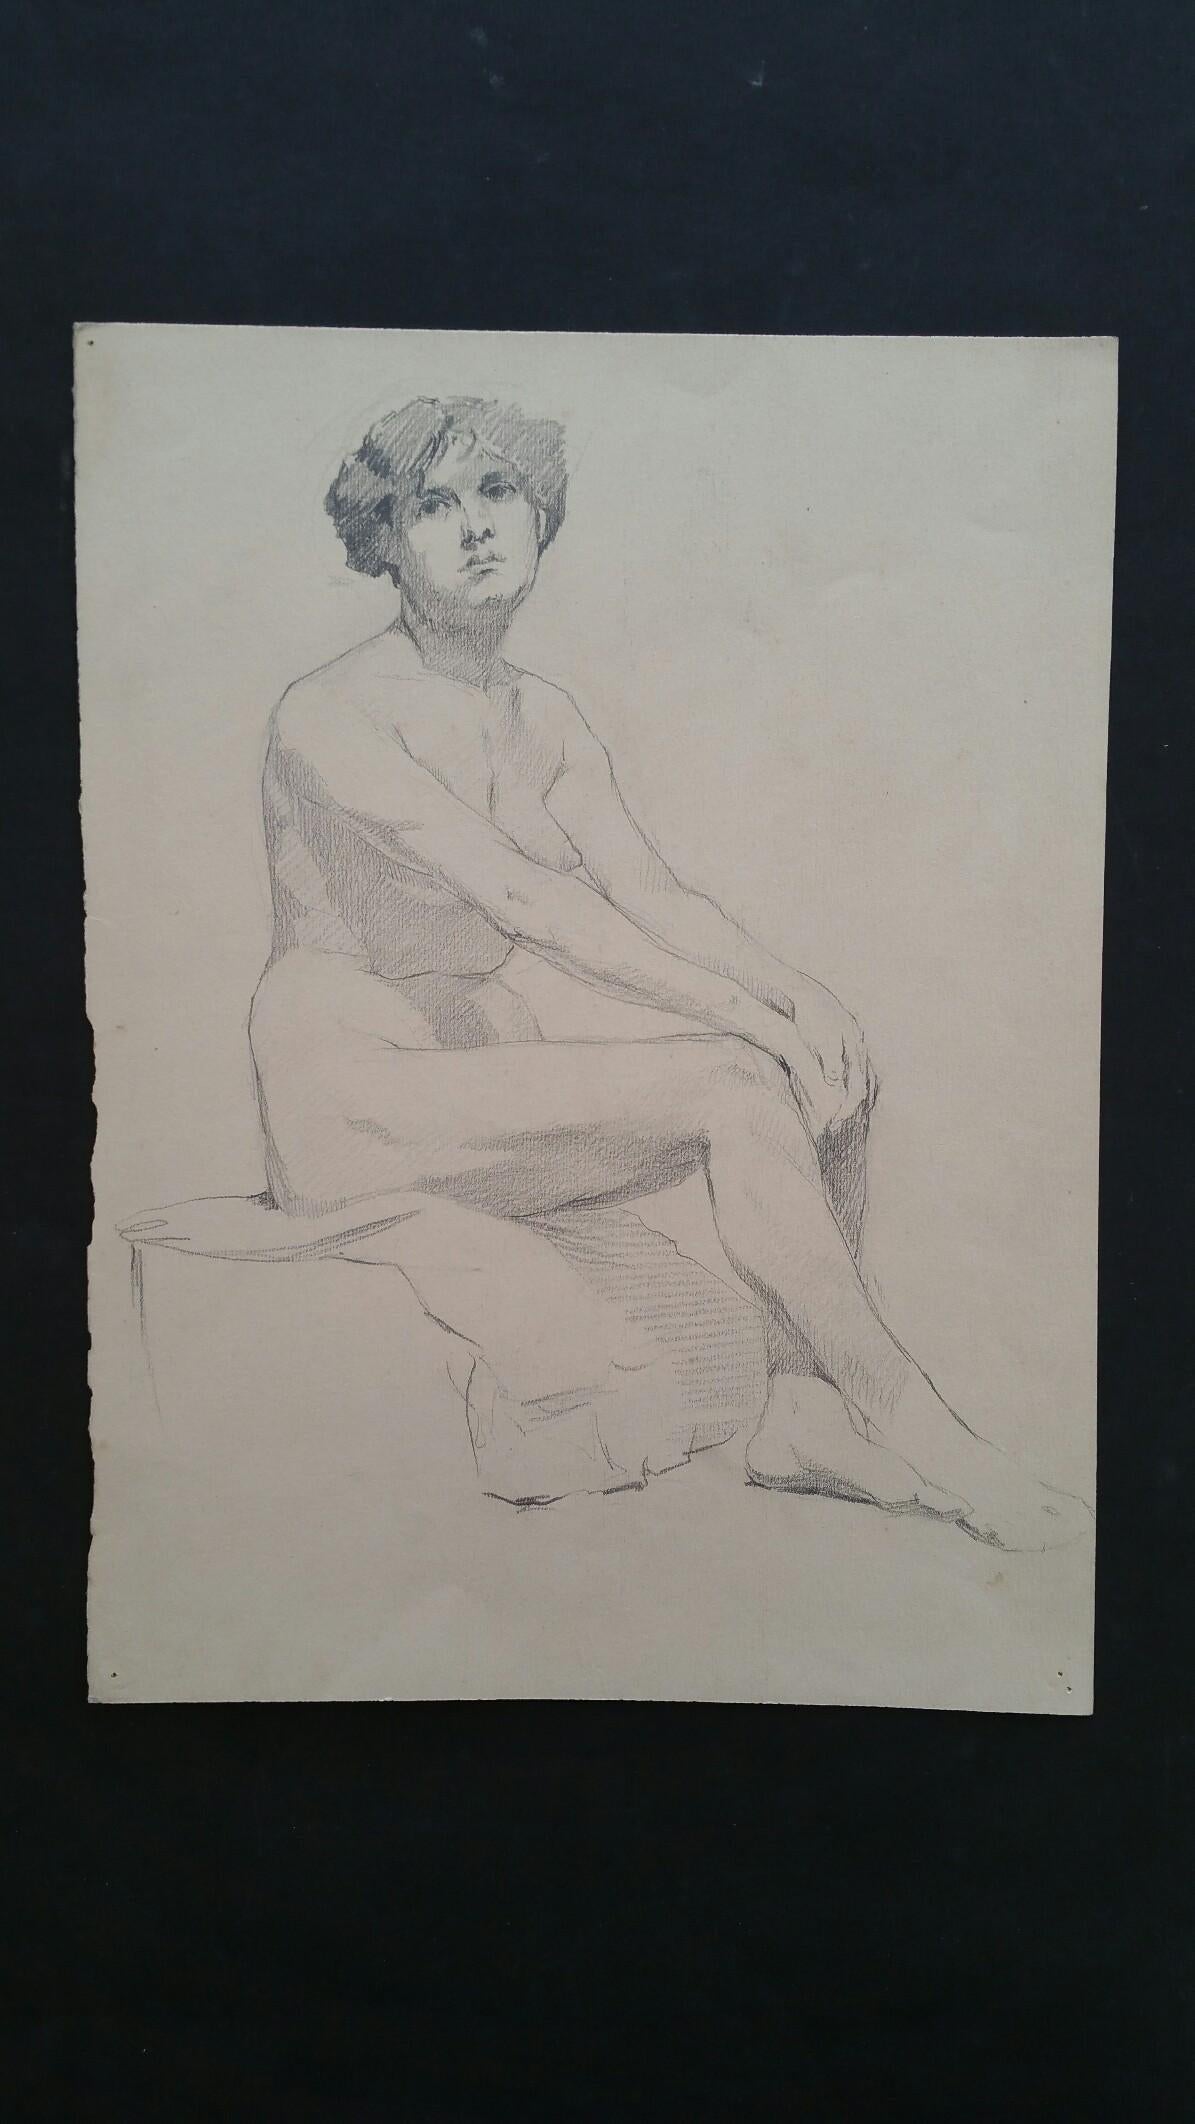 English Graphite Sketch of a Female Nude, Seated in Profile
by Henry George Moon (British 1857-1905)
on off white artists paper, unframed
measurements: sheet 13.5 x 11 inches 

provenance: from the artists estate

Condition report: pin holes